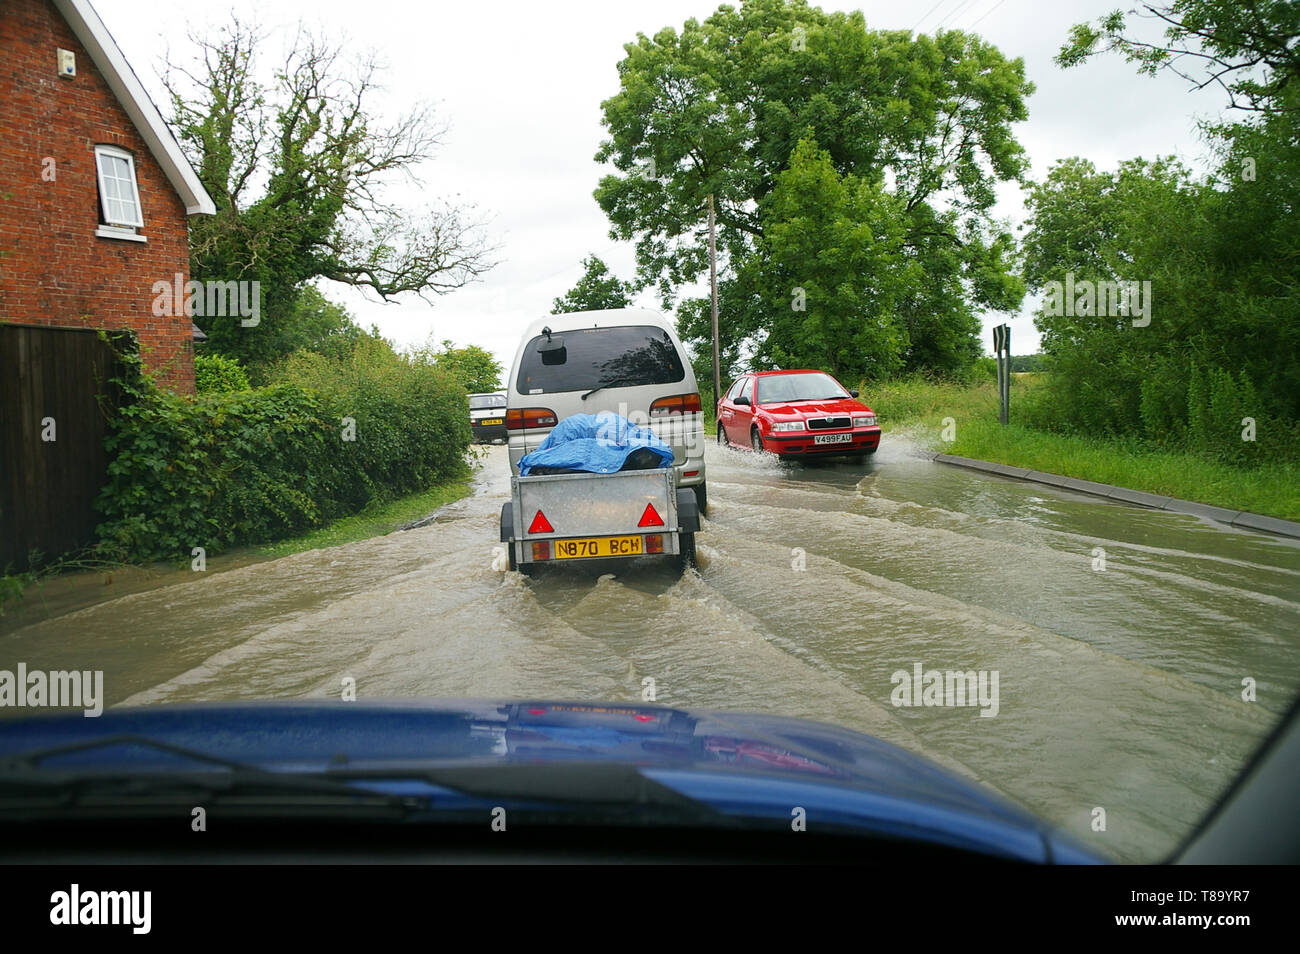 Driving through flooded road with cars. Driver's view from inside car driven through rainwater flood in Lincolnshire country road near property. Stock Photo